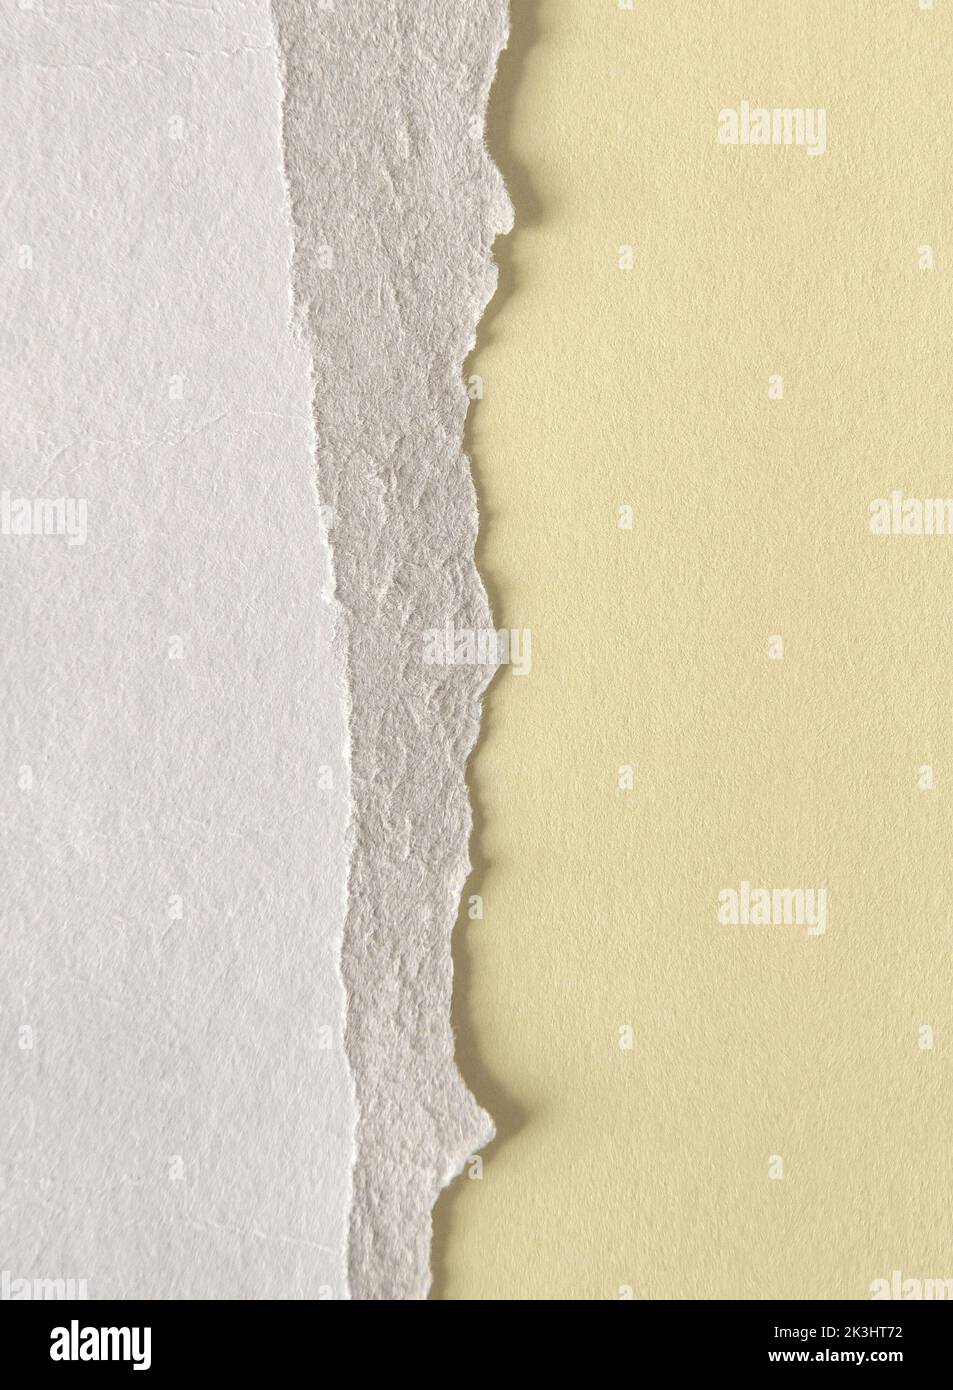 Template background torn edges. Ripped paper mock up copy space Stock Photo